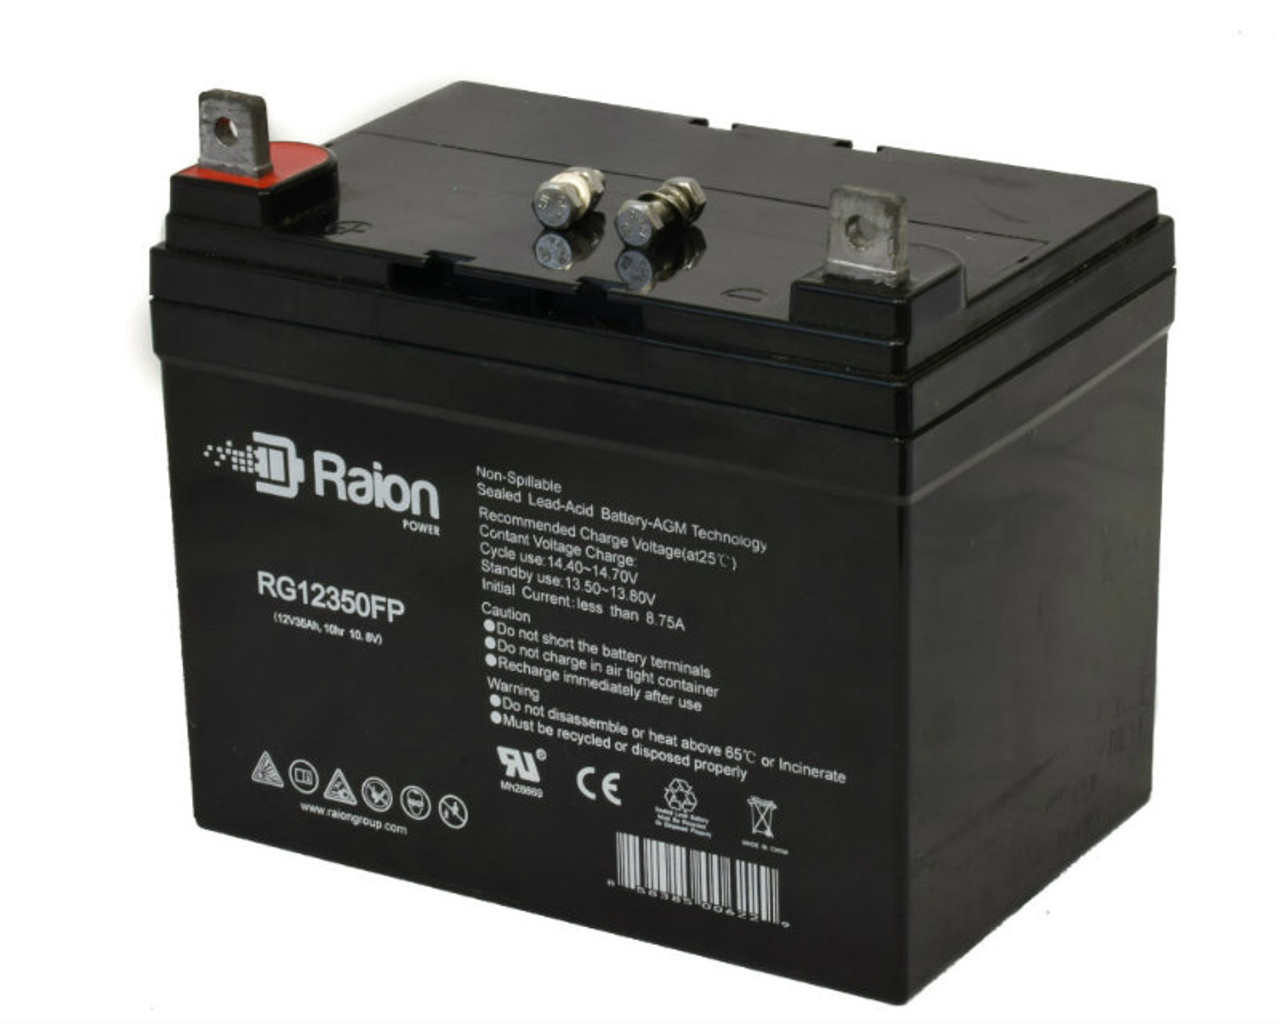 Raion Power Replacement 12V 35Ah RG12350FP Mobility Scooter Battery for Bruno SuperCub 46